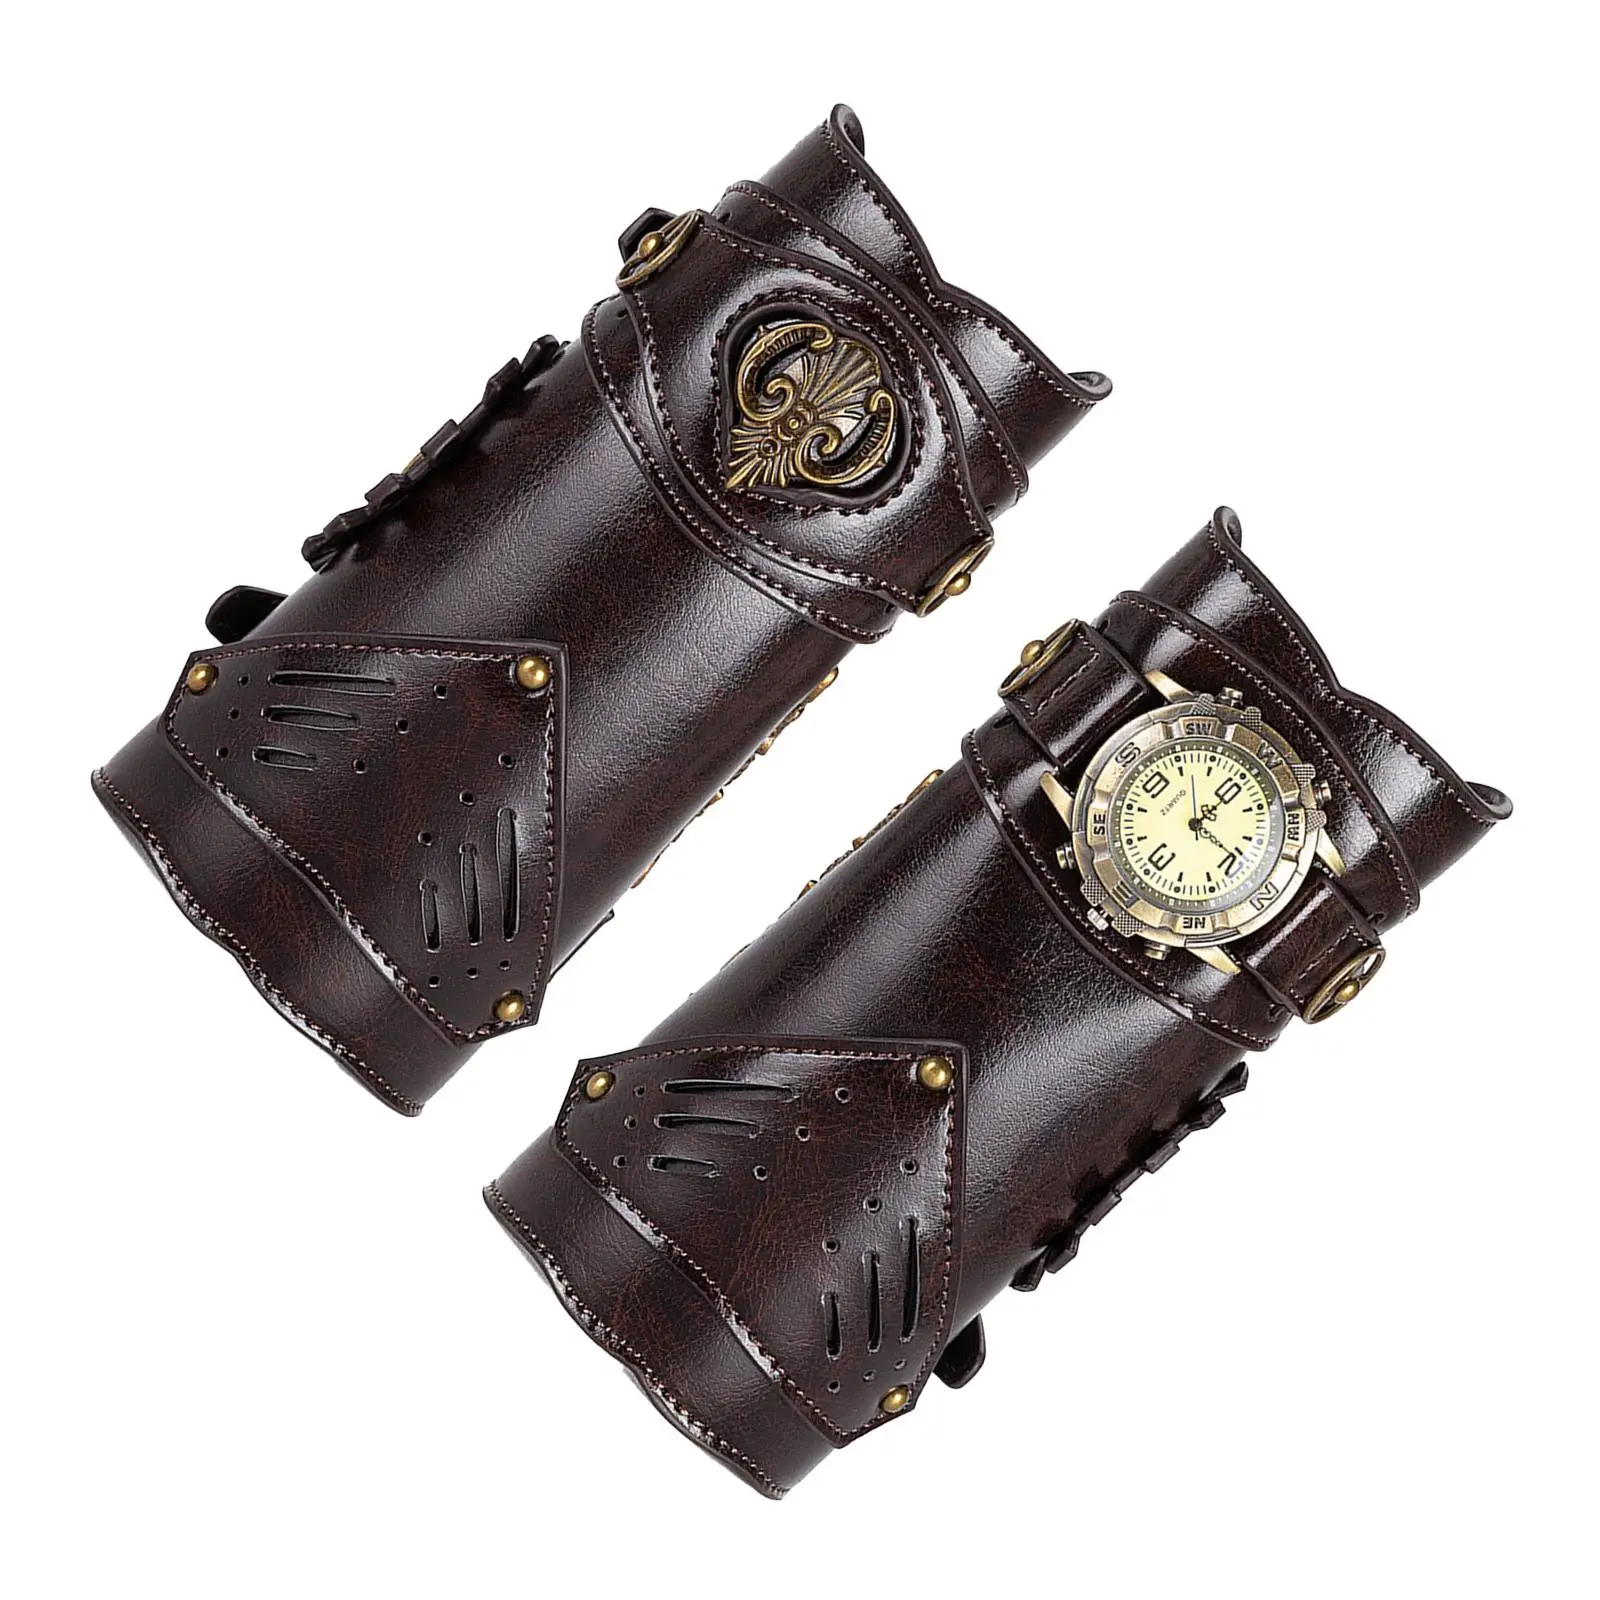 

PU Leather Arm Guards Steampunk Armband Medieval Bracers for Masquerade Cosplay Stage Performance Costume Props Halloween